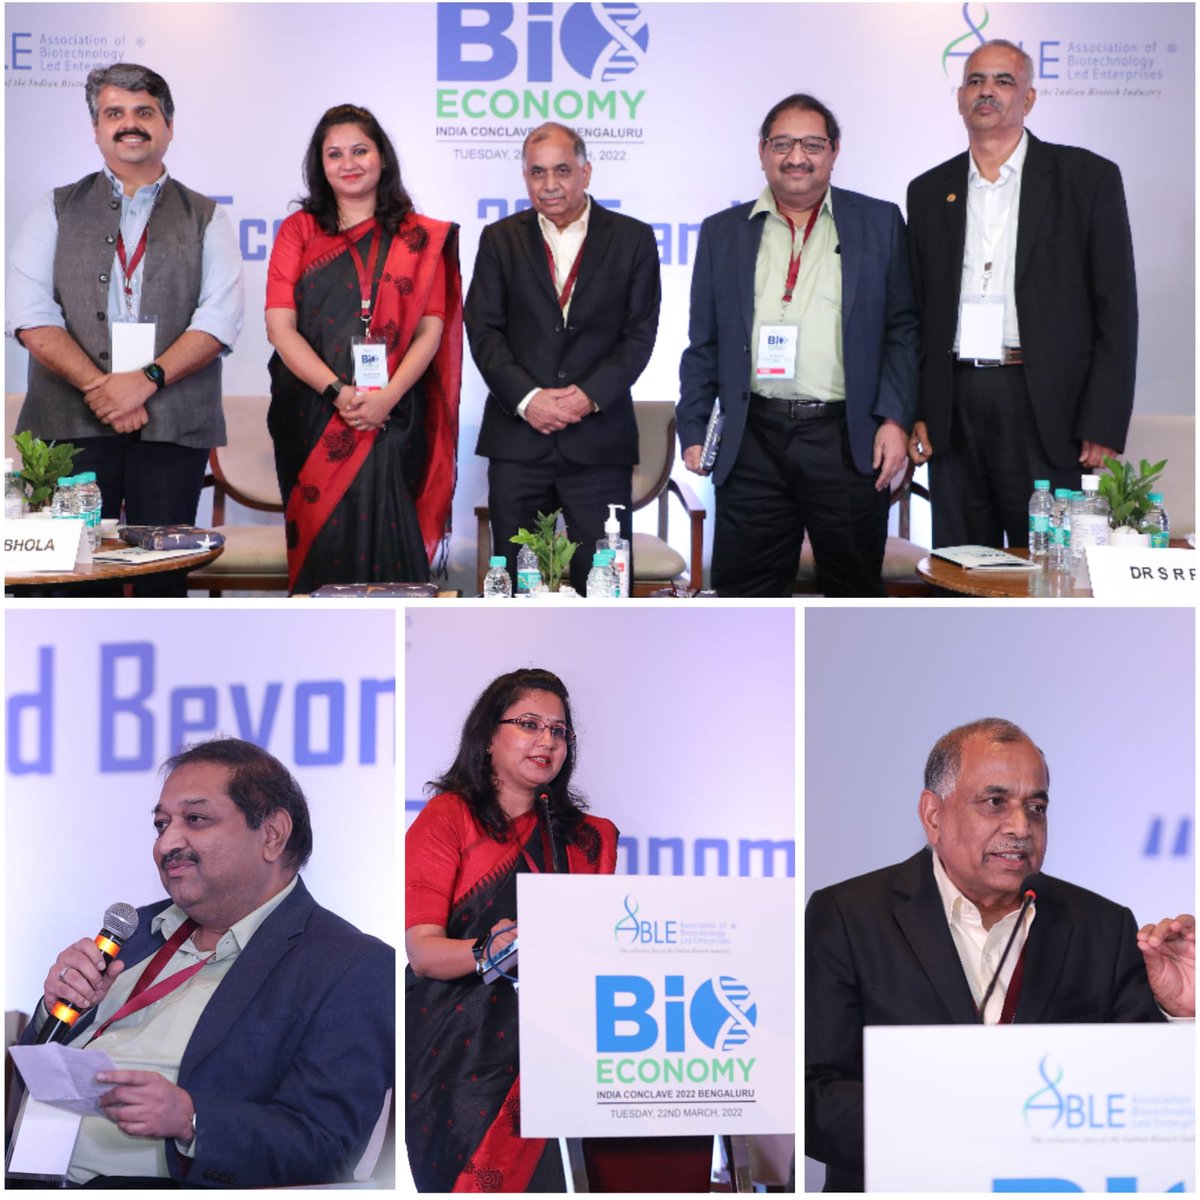 BioEconomy India Conclave 2022: 'Special Round Table on Expedited approvals, Regulatory simplifications & refined Biodiversity laws was discussed- moderated by Mr Ravi Bhola, ABLE Dr Rubina Bose, DCGI Dr. S. R. Rao, APAR Dr Satish Kulkarni, NDRI Ms Neha Srivastava Remfry & Sagar